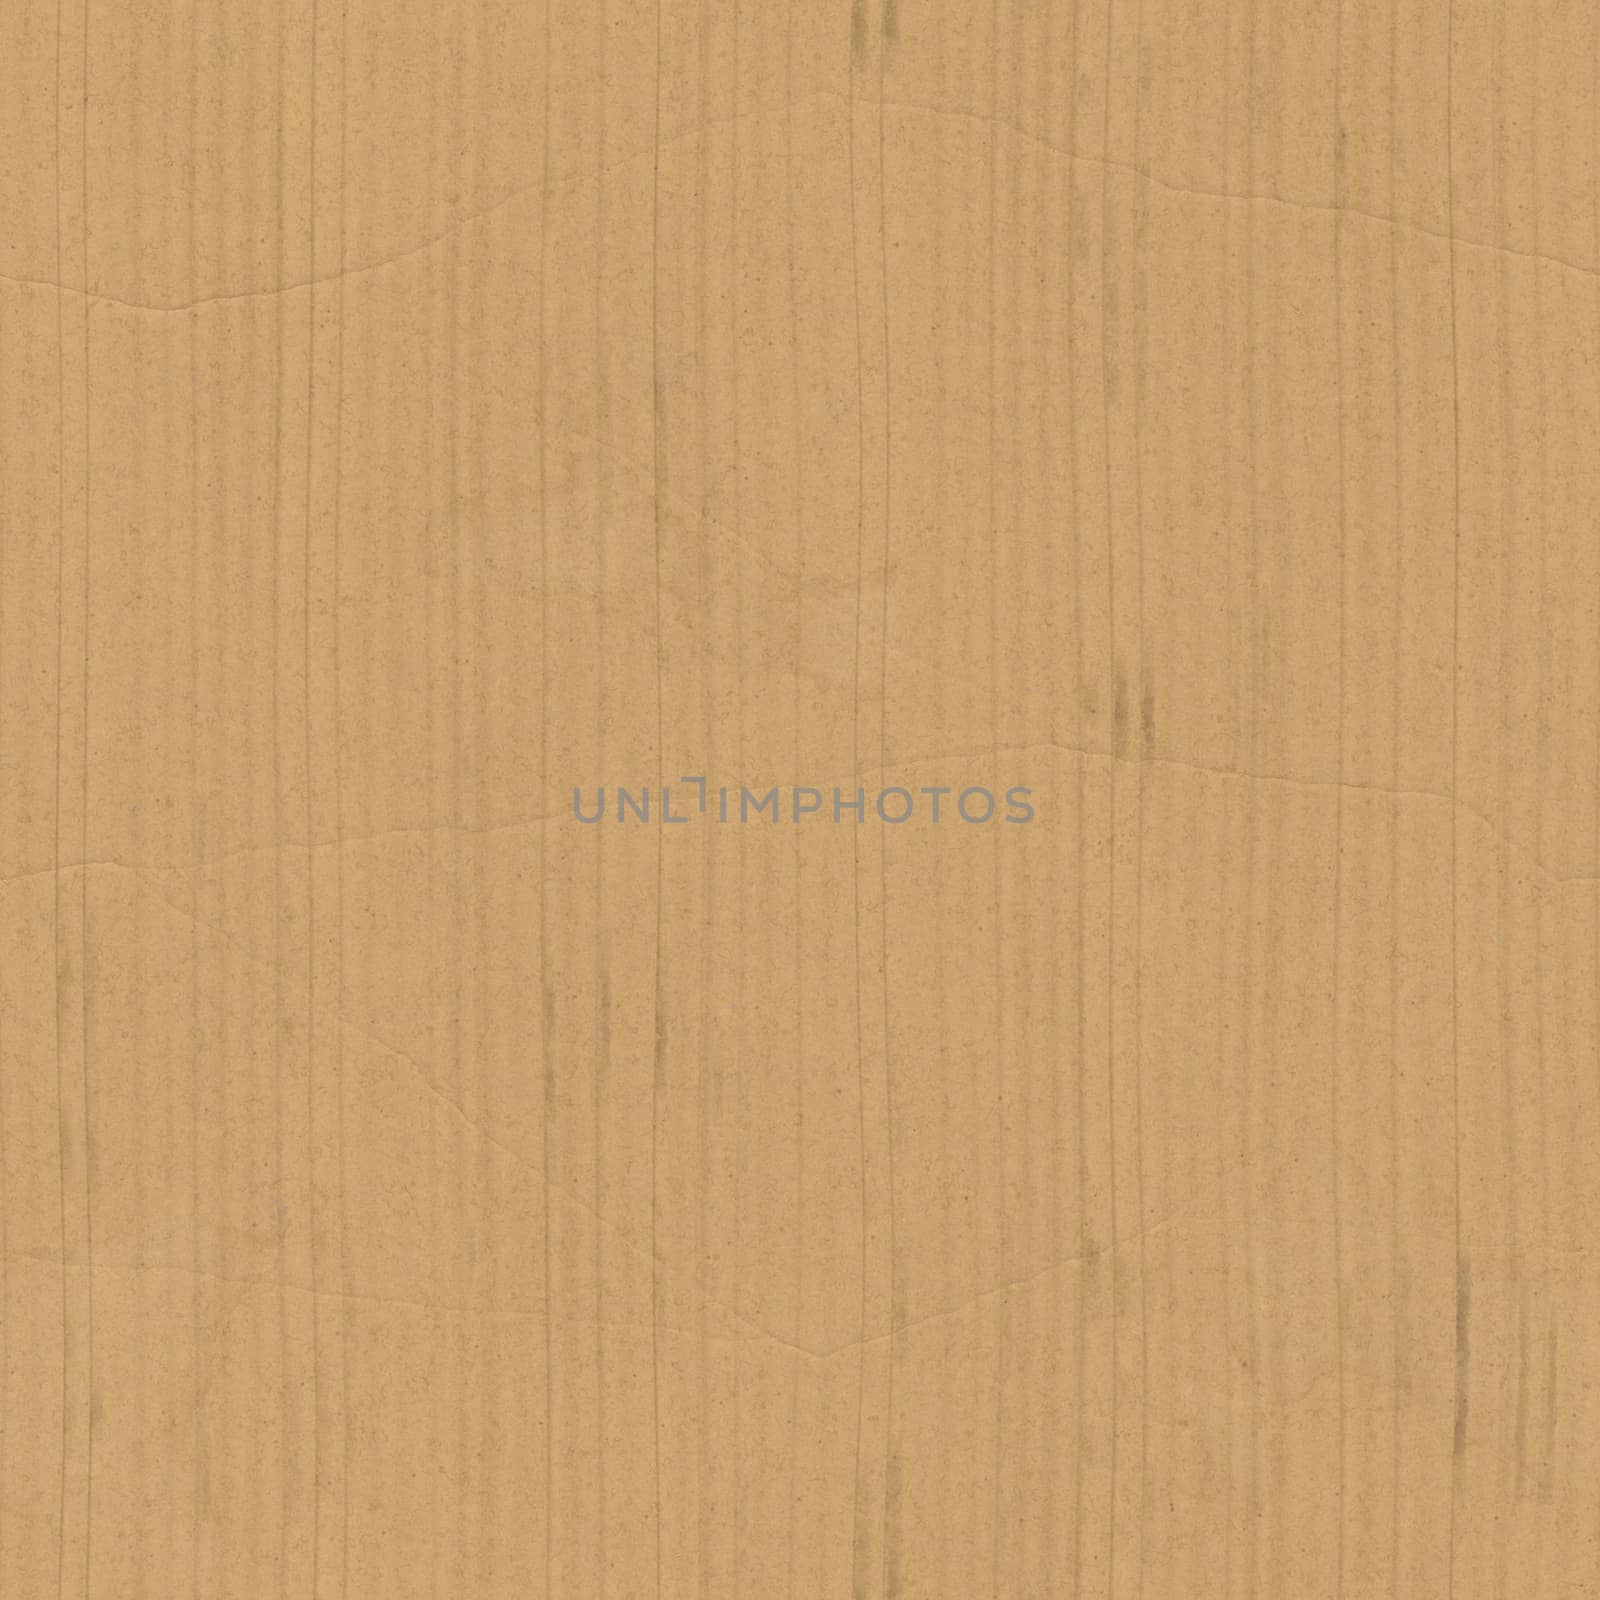 An illustration of a seamless typical cardboard texture background